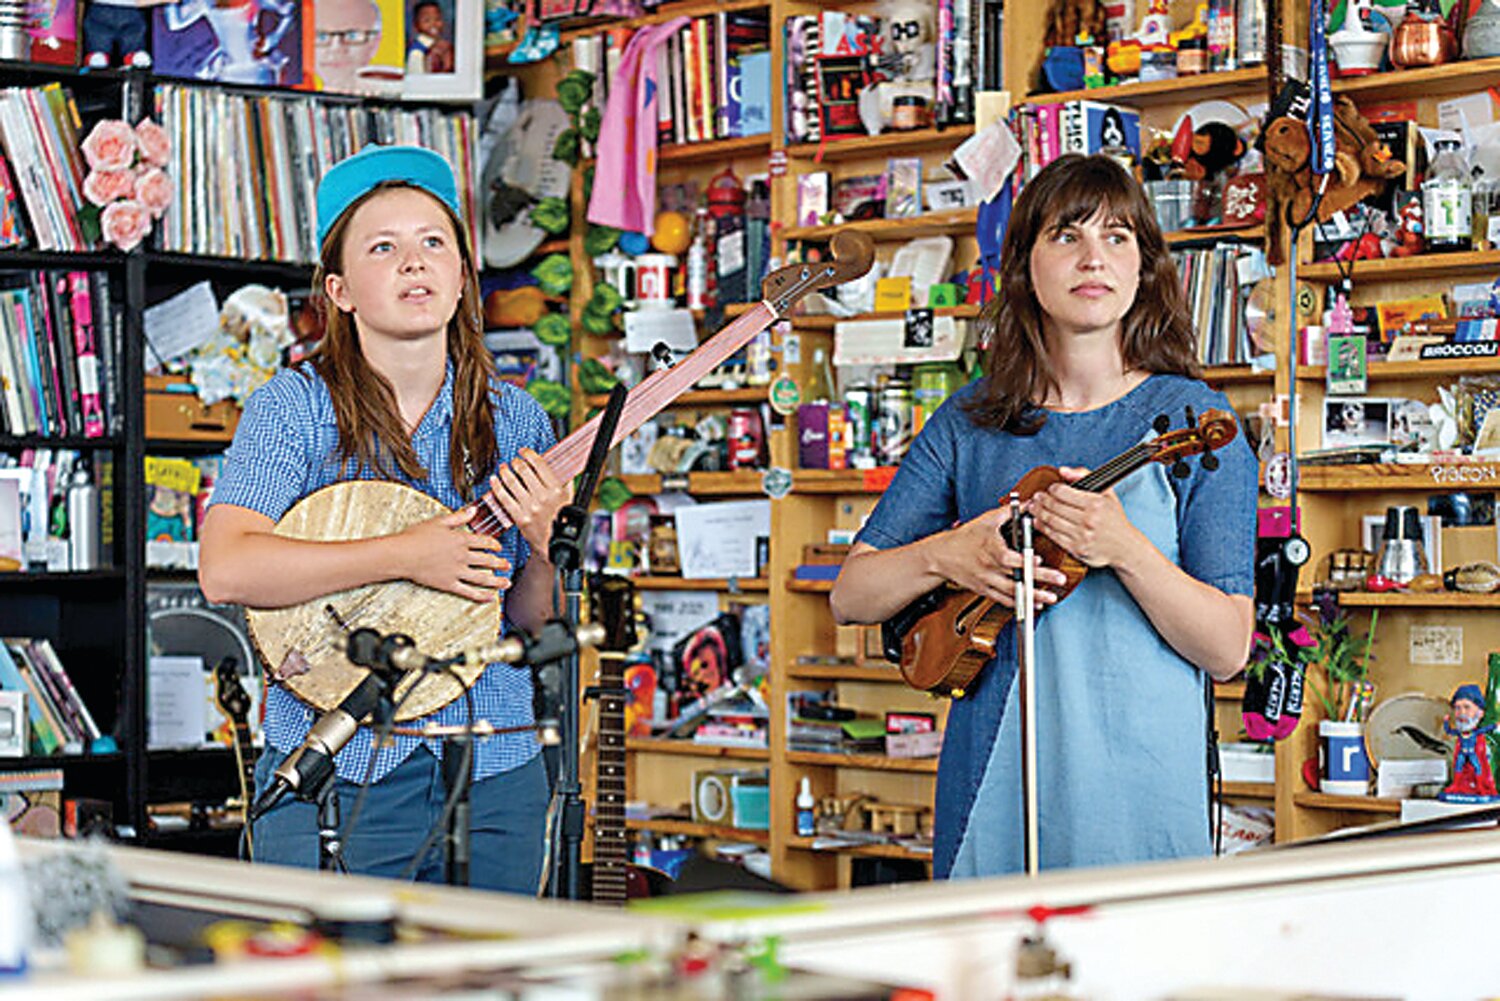 Nora Brown, left, and Stephanie Coleman perform in an NPR Tiny Desk Concert.